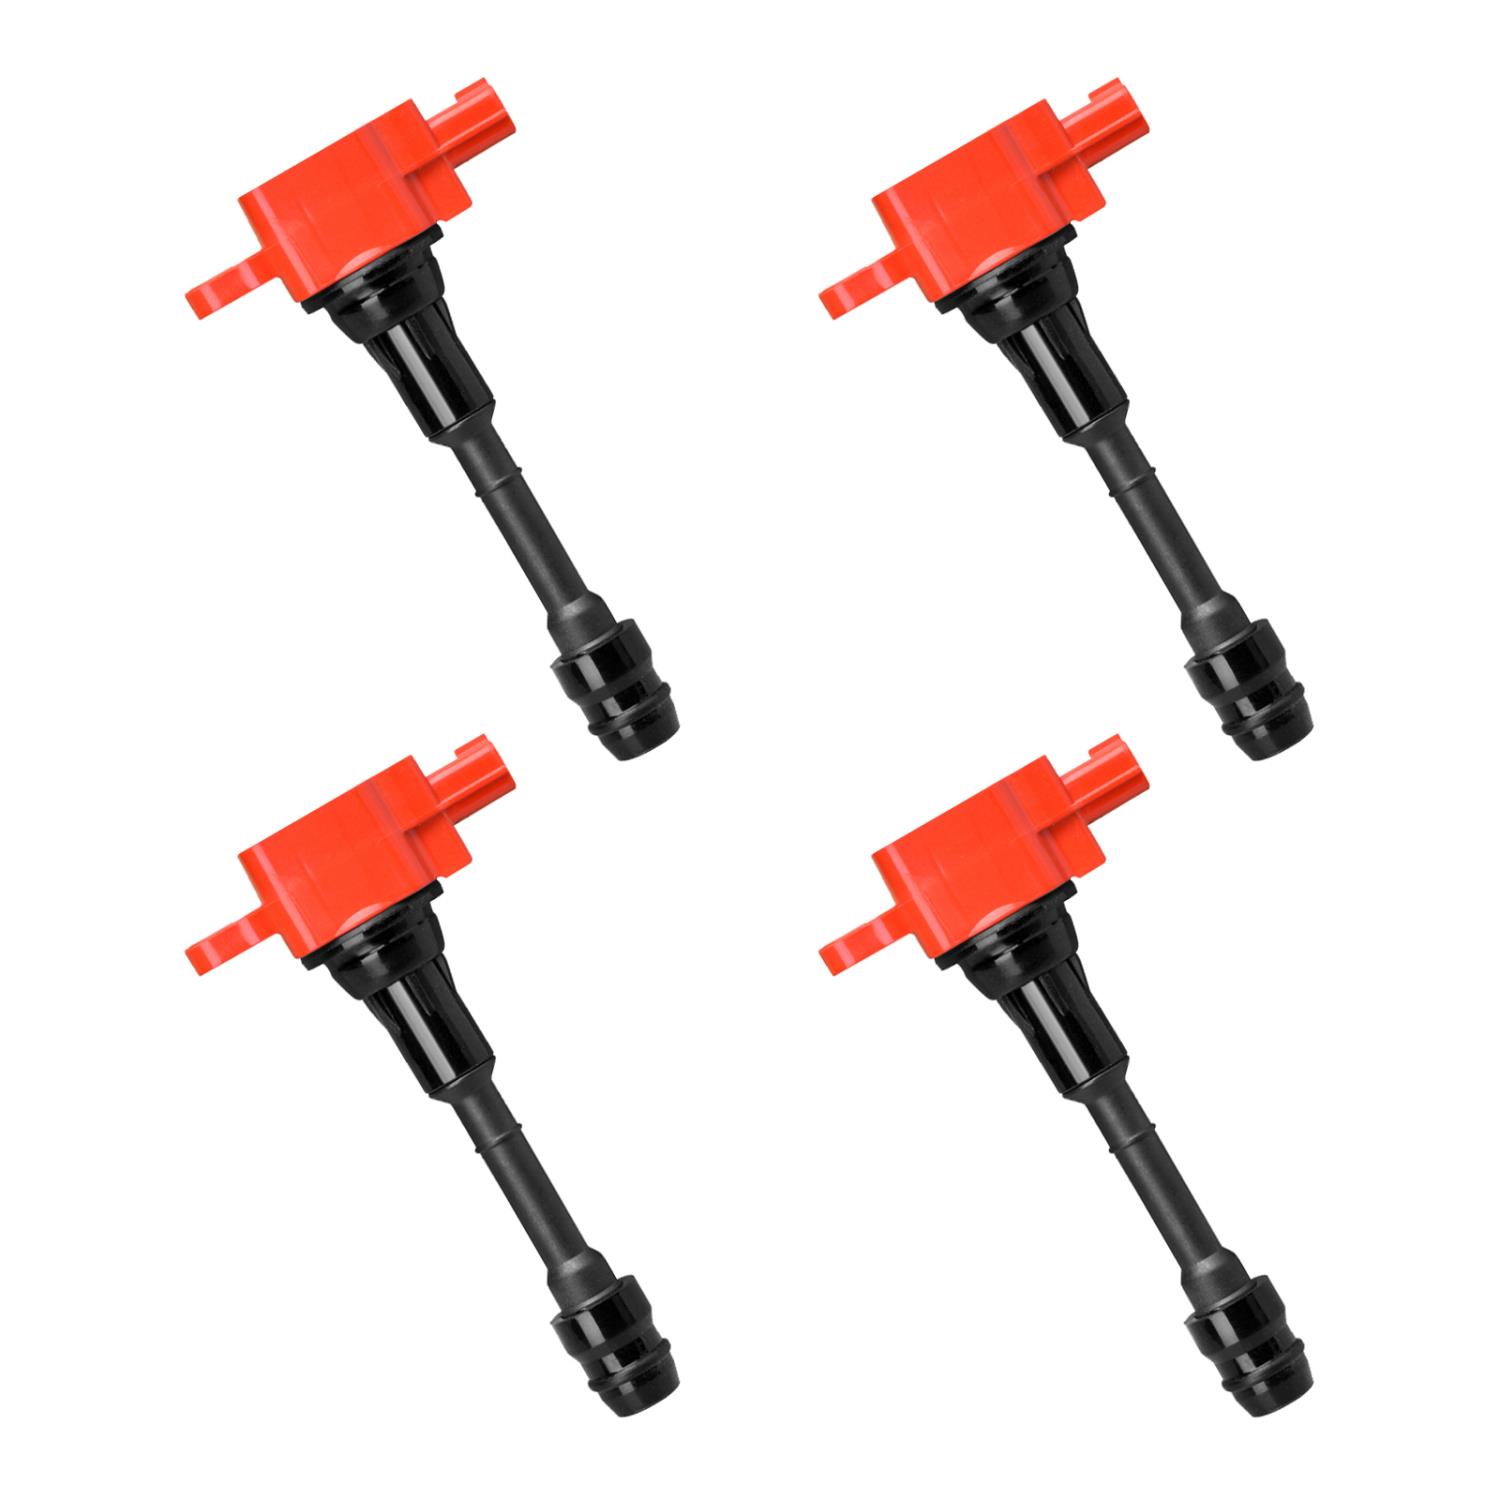 High-Performance Ignition Coils for Nissan Altima Sentra L4 [Red]